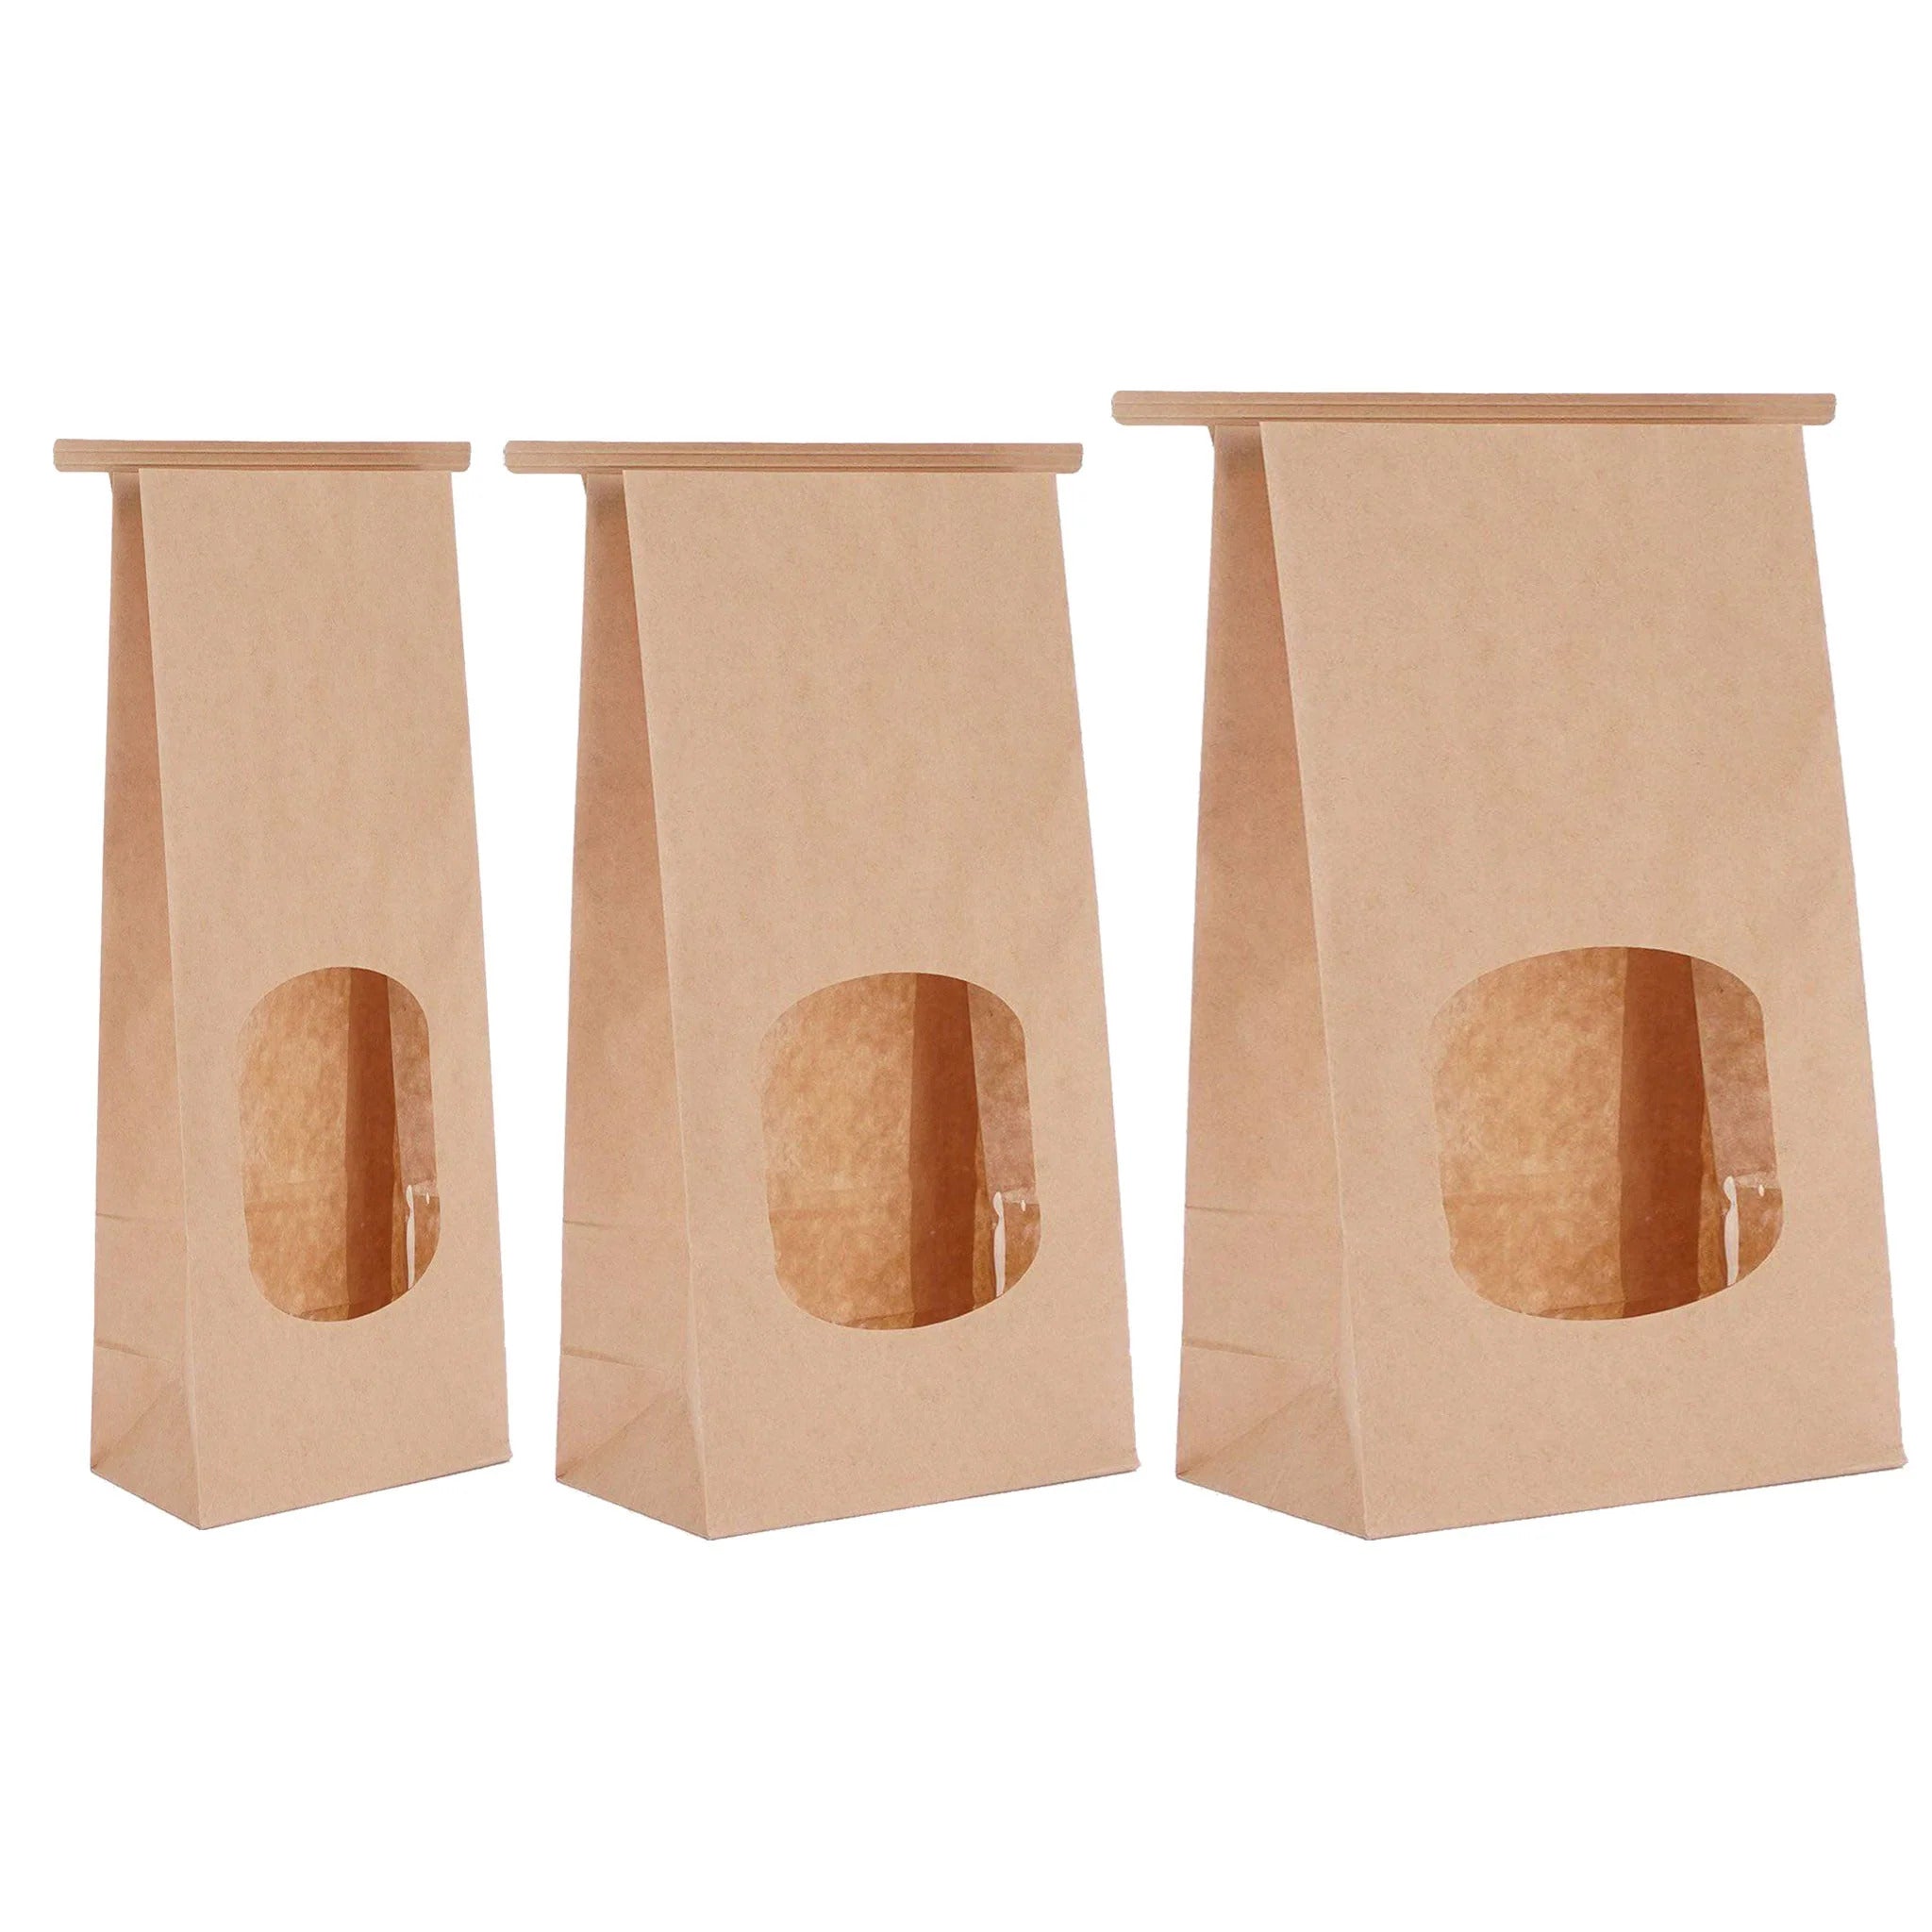 Tin Tie Bags With Window-Hotpack